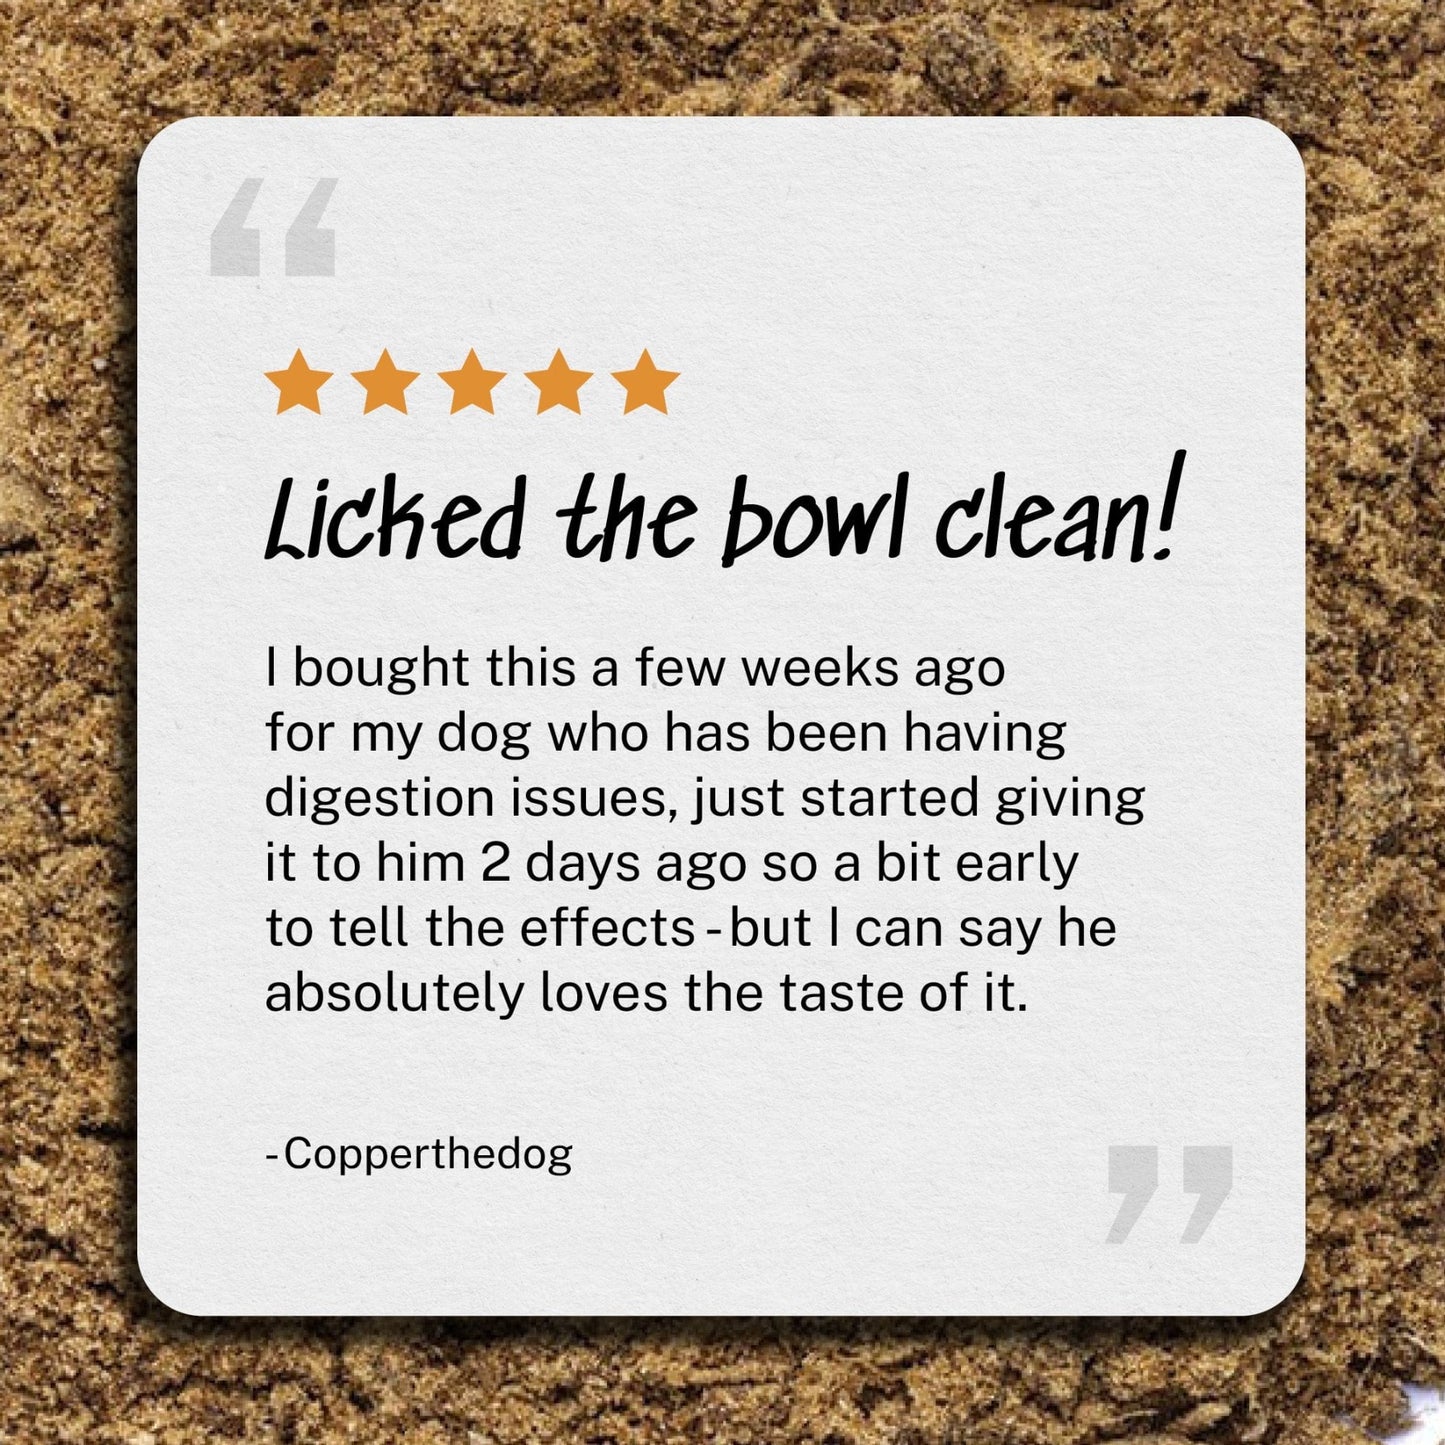 Review: Licked the bowl clean - I bought this a few weeks ago for my dog who has been having digestion issues, just started giving it to him 2 days ago so a bit early to tell the effects - but I can say he absolutely loves the taste of it. -  Copperthedog